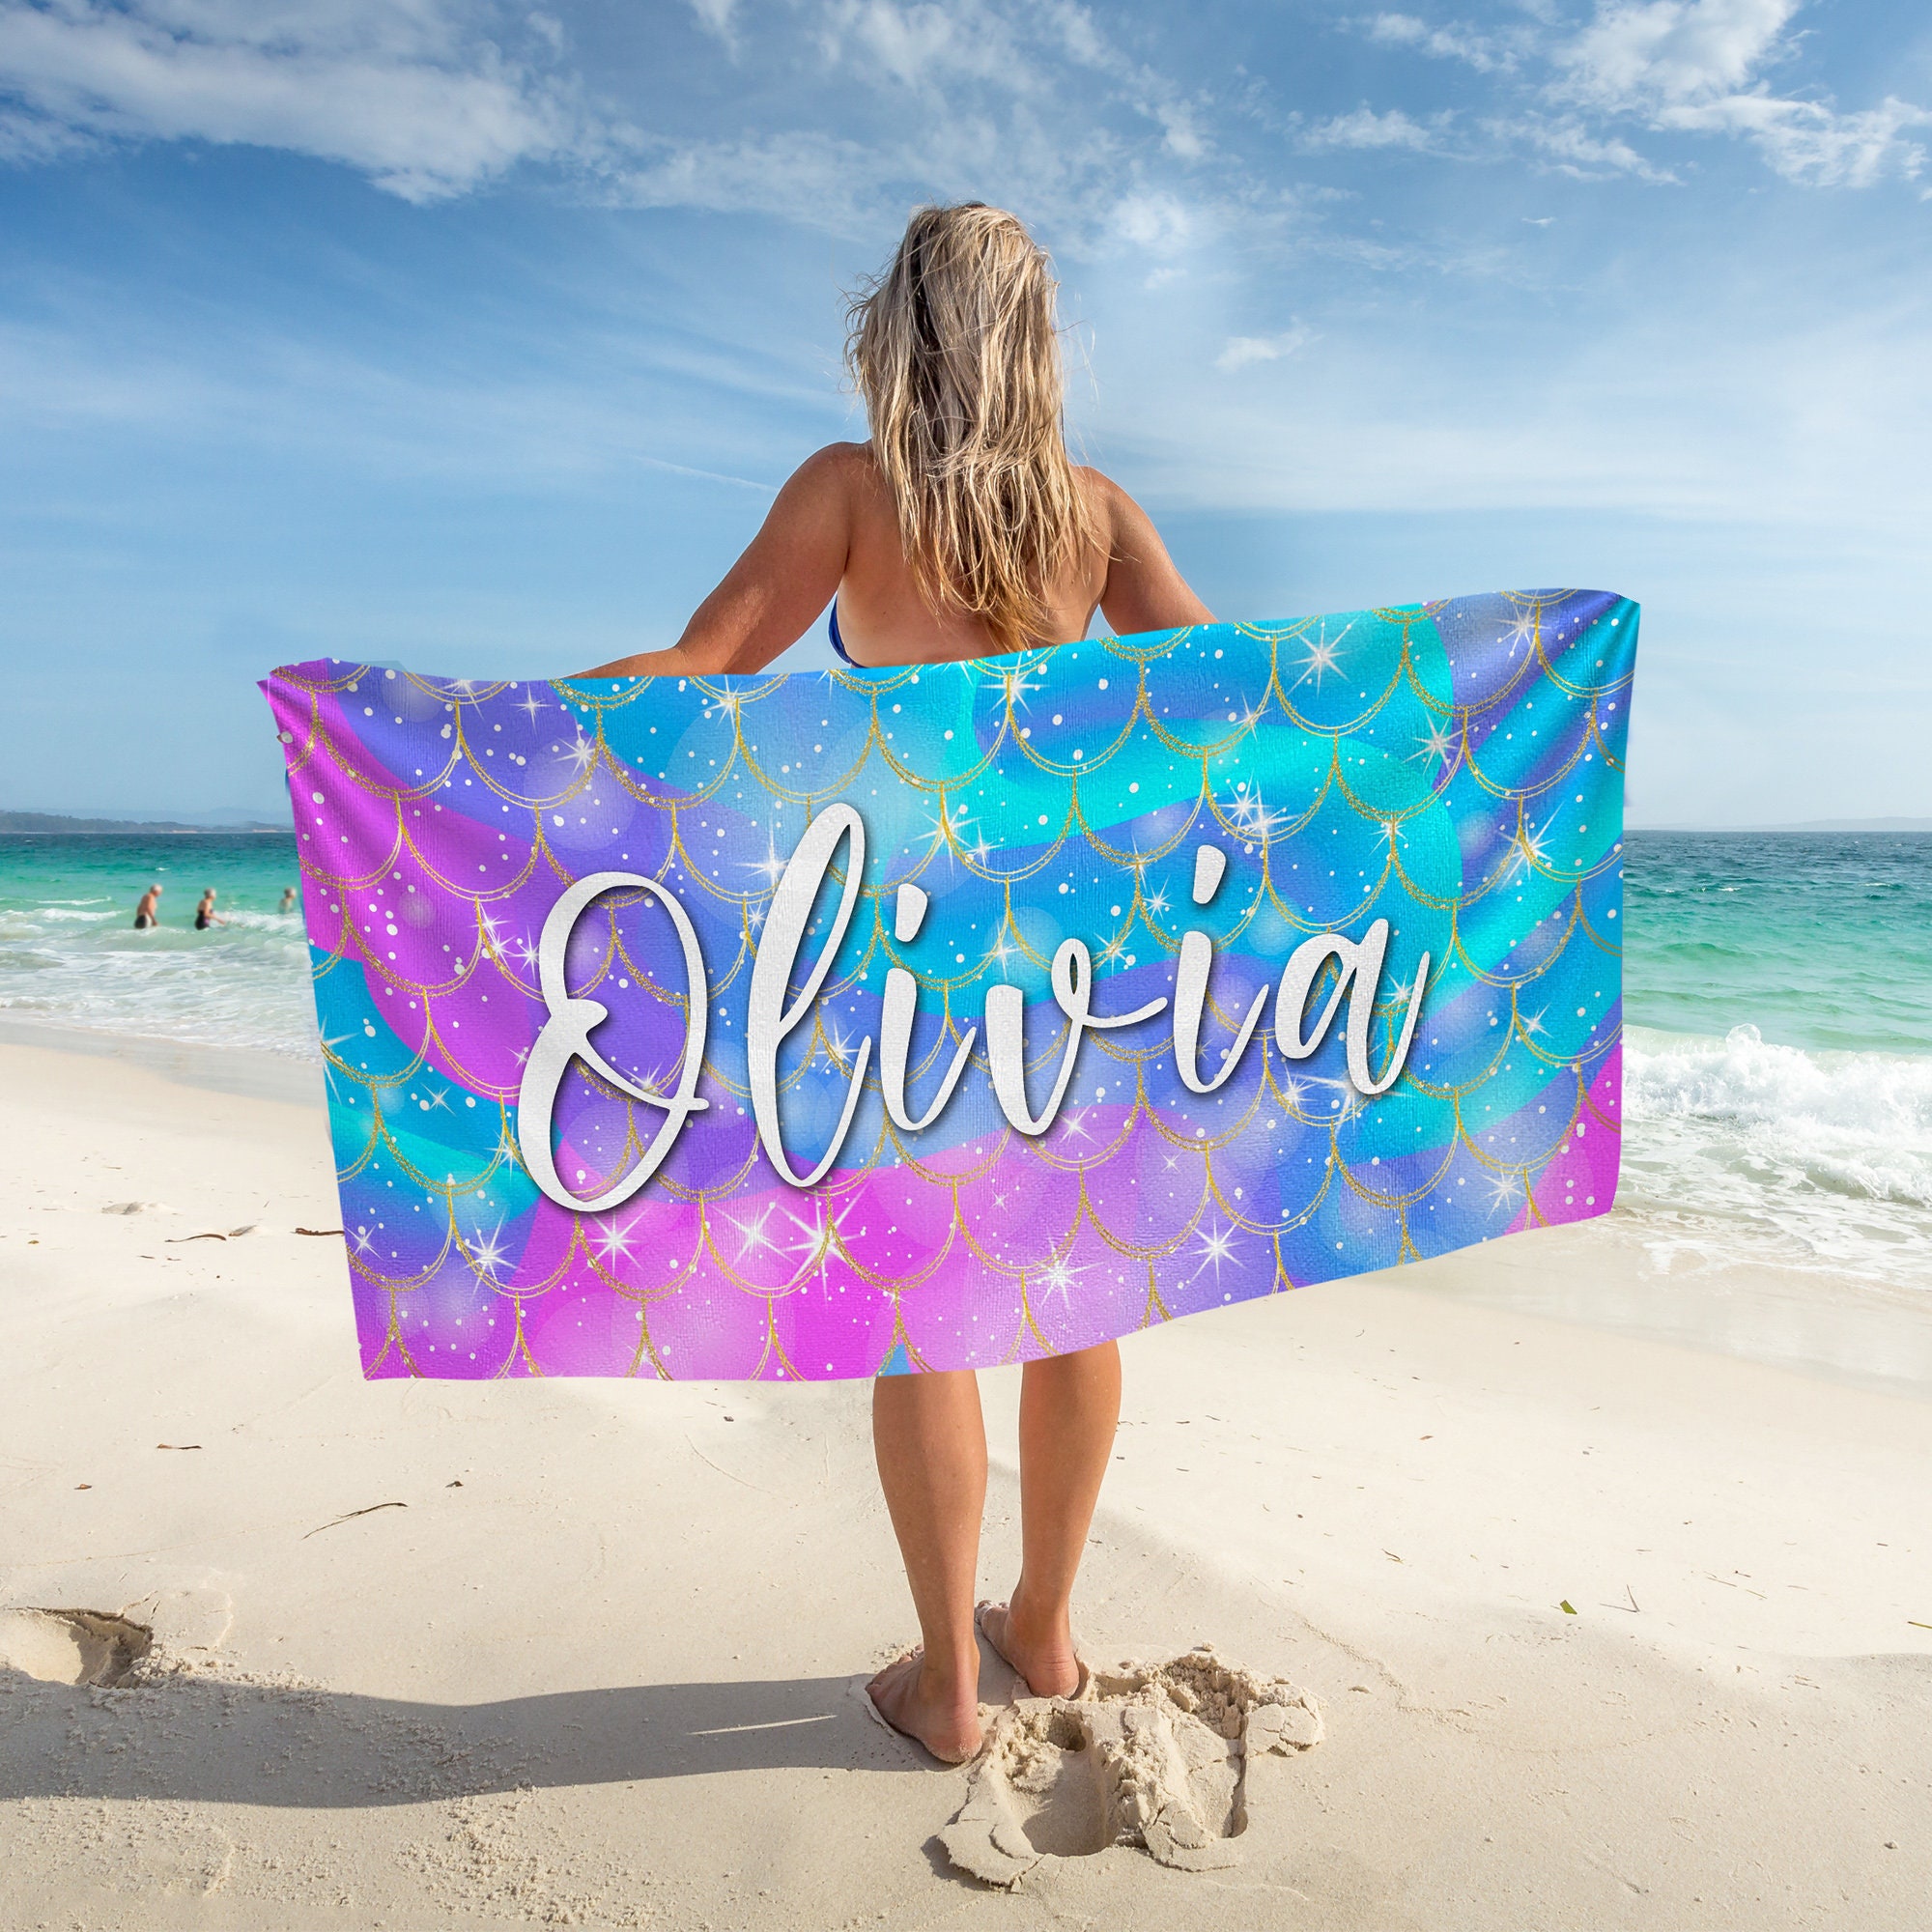  Personalized Monster Trucks Beach Towels for Kids Adults,  Custom Name Beach Towel for Boys Girls Microfiber Quick Dry Bath Towel  Personalize with Your Name Pool Towel for Summer Vacation Fun 29''x58'' 